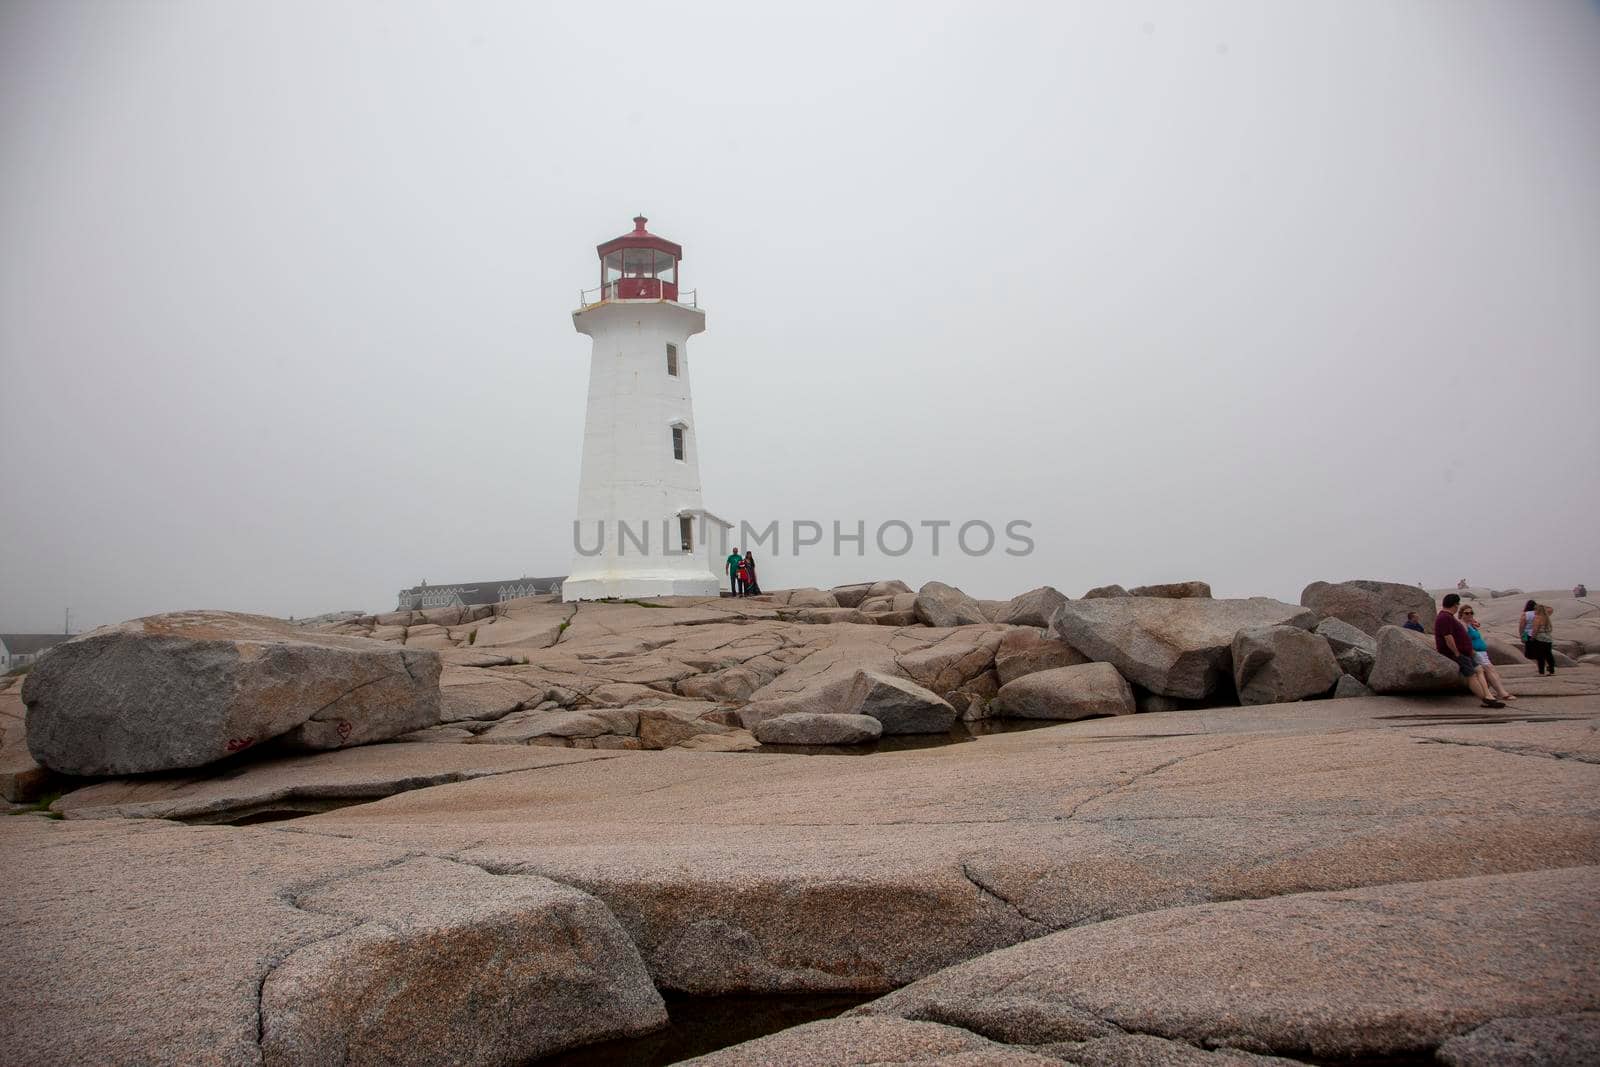 Halifax, Nova Scotia: July 19, 2020: A summer day at Peggy's Cove during the pandemic with a few tourists near the lighthouse